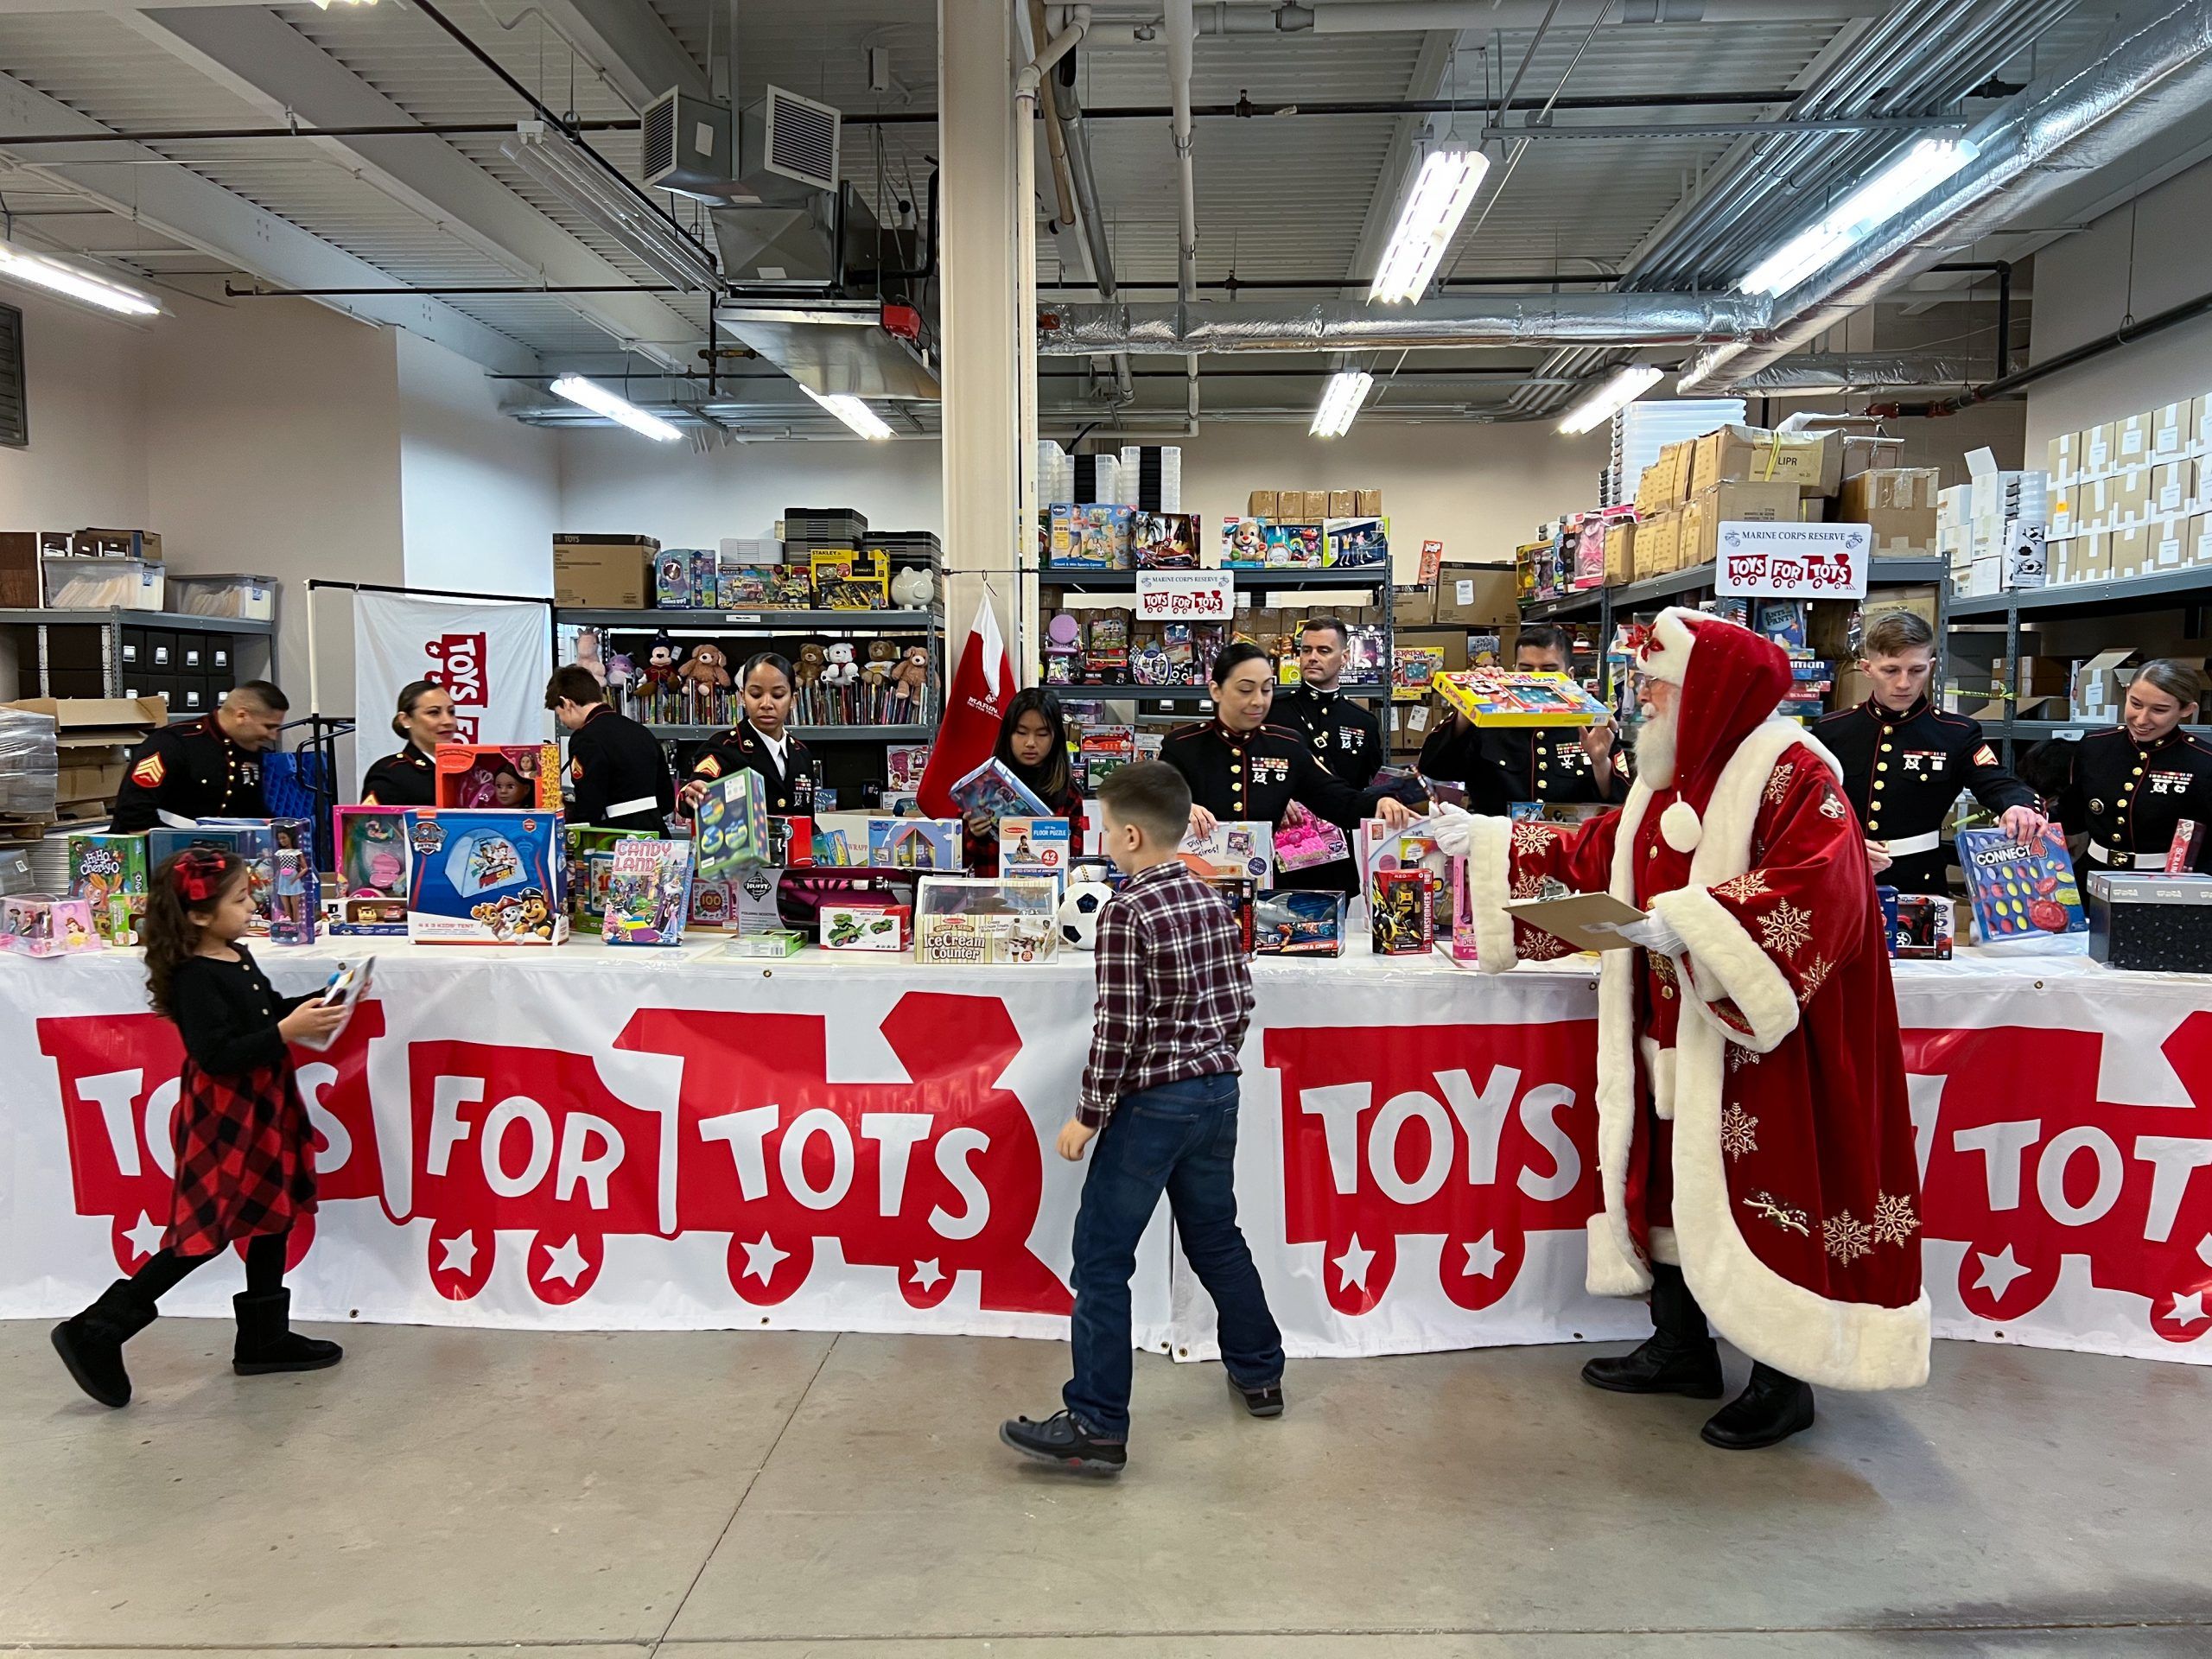 Children pick up the donated toys